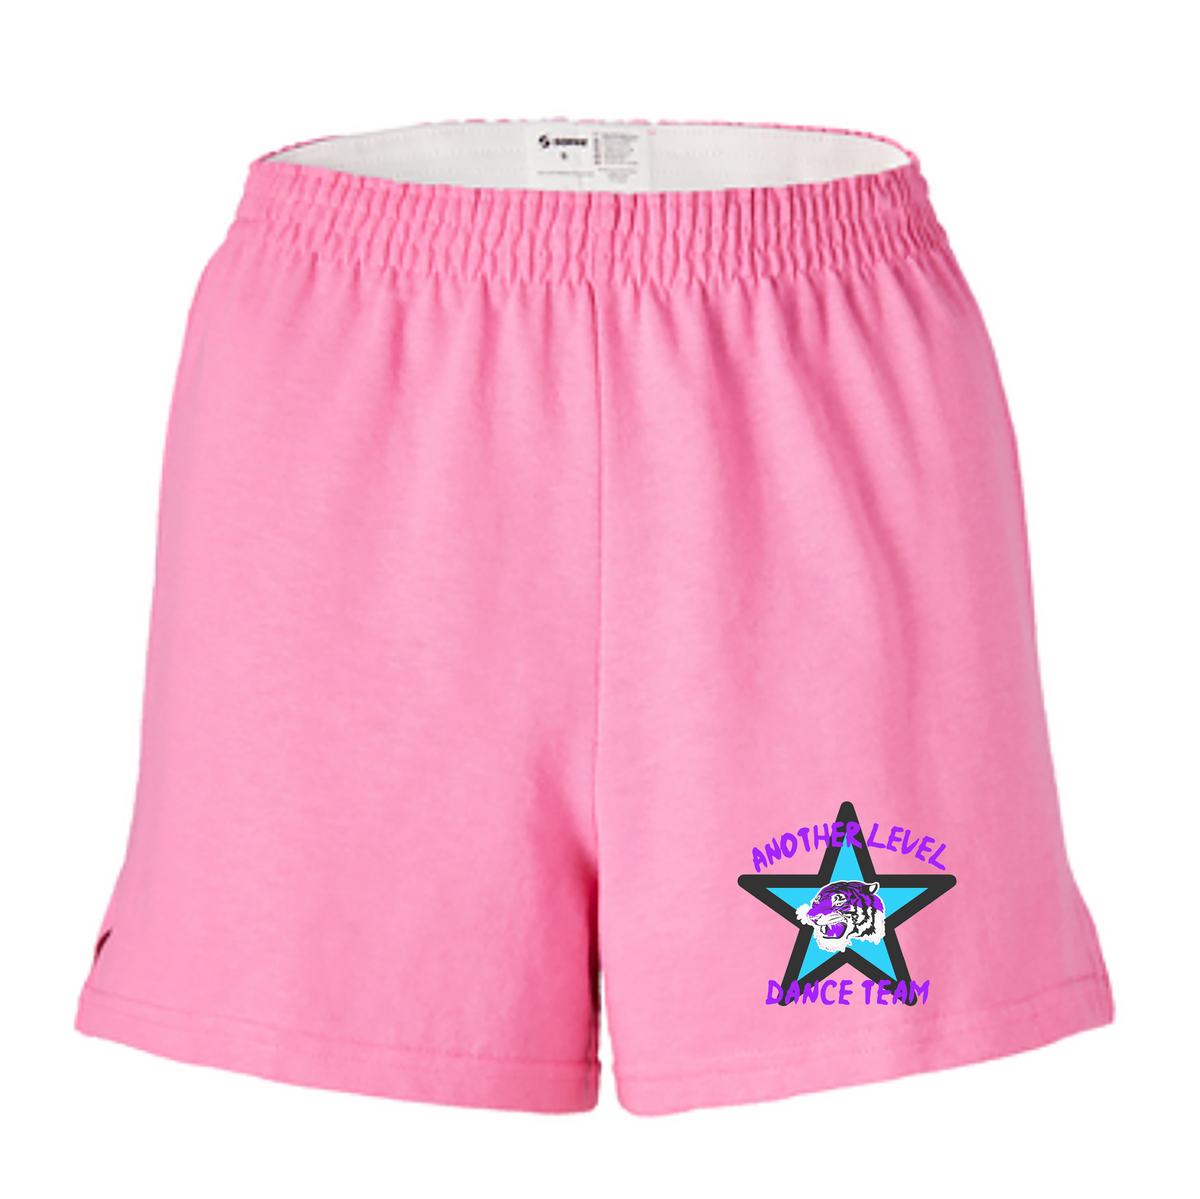 Another Level Dance Team Women's Soffe Shorts